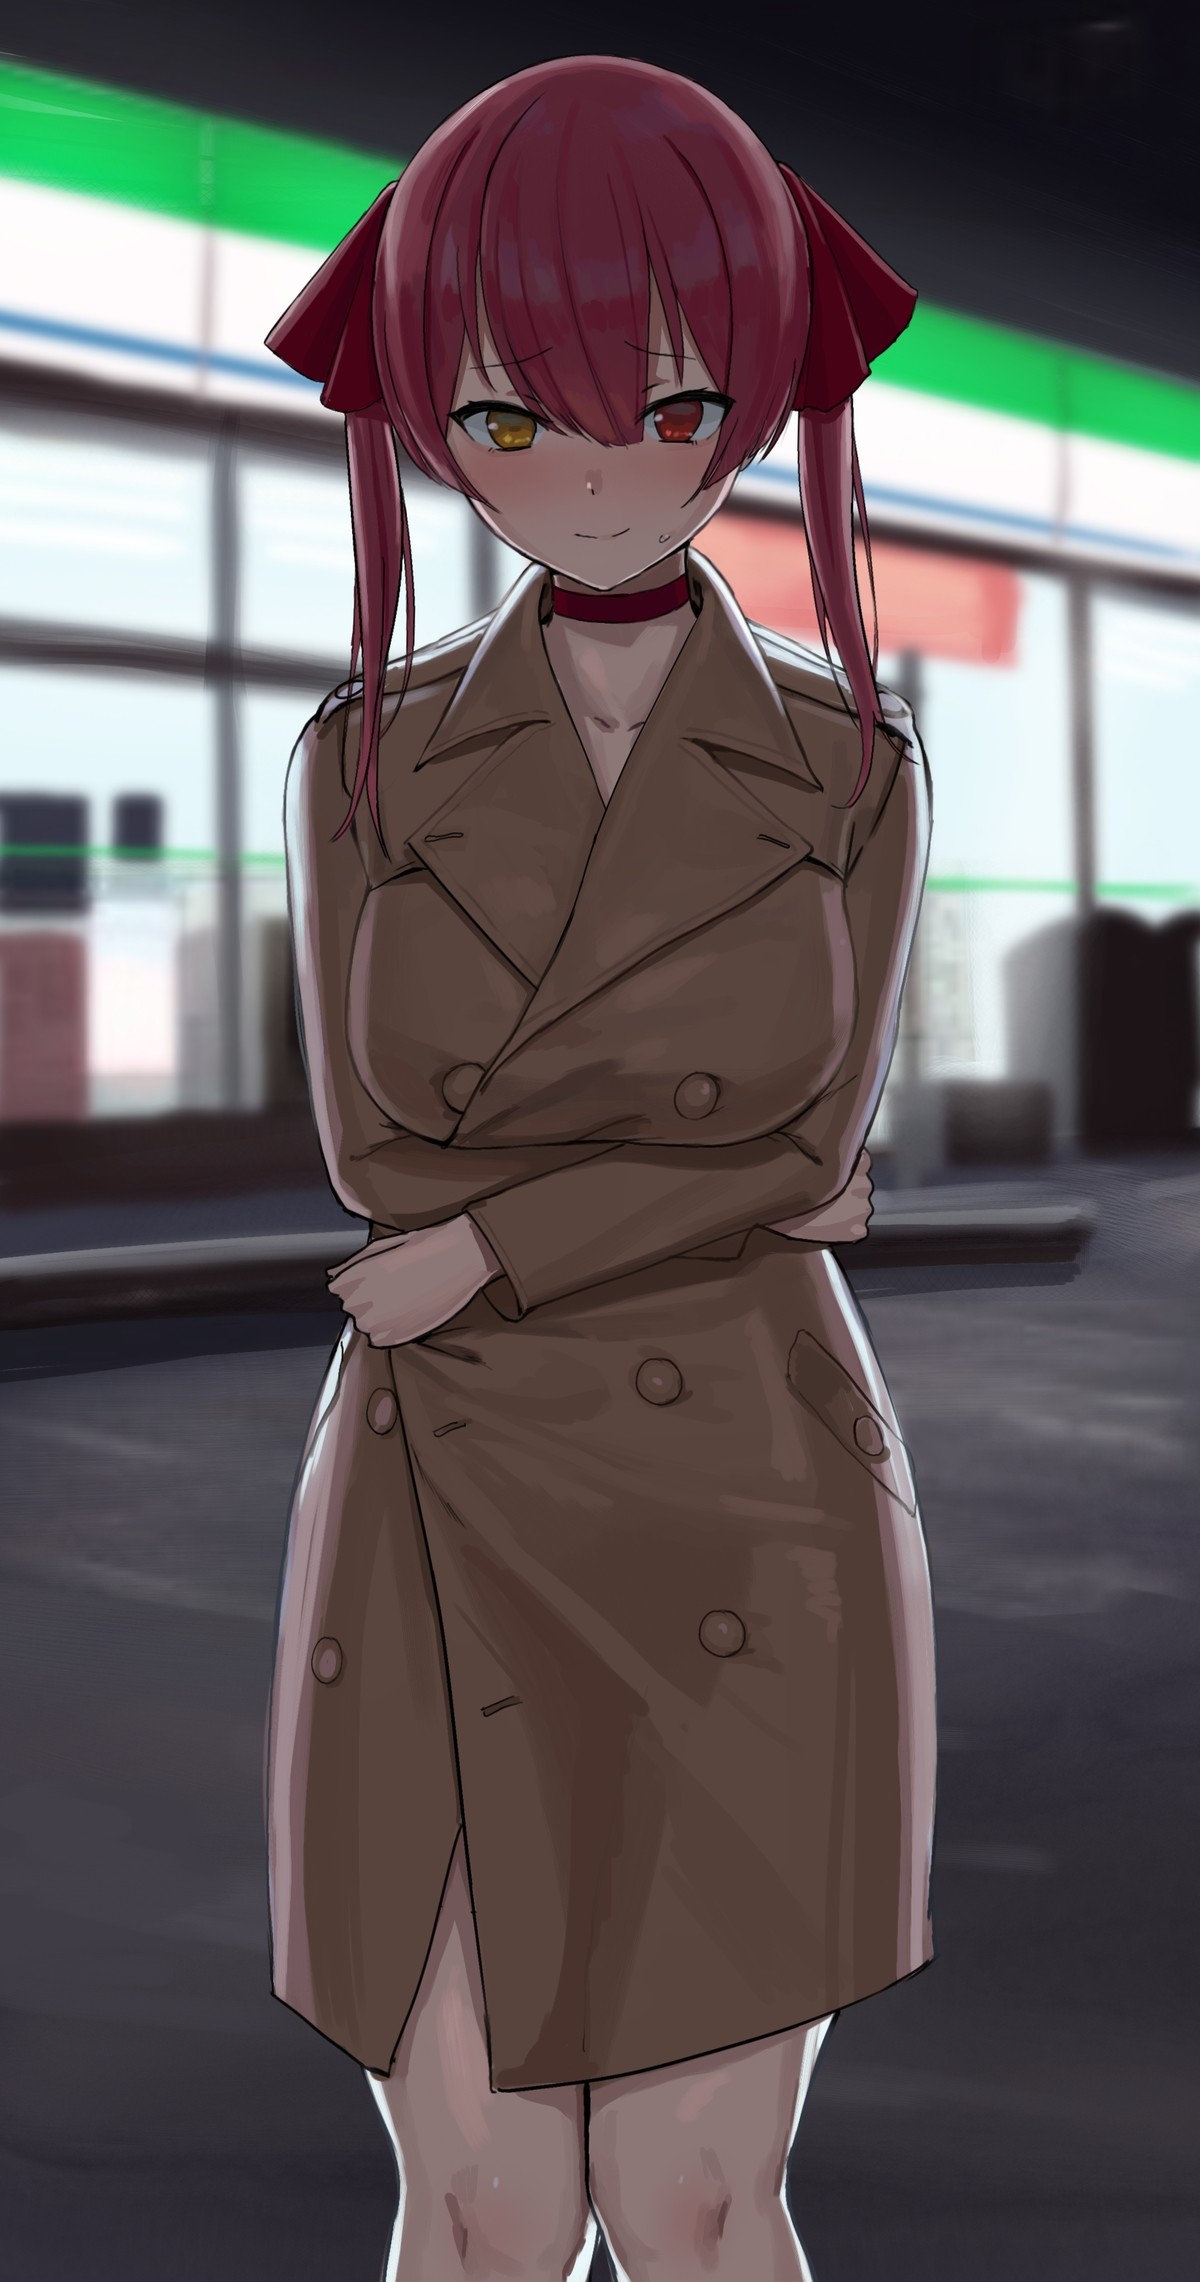 Trench Coat. .. Good thing you had that trench coat to lend her. She wore clothing for warmer weather, thinking it wouldn't be that cold outside. Wouldn't want her to catch a c